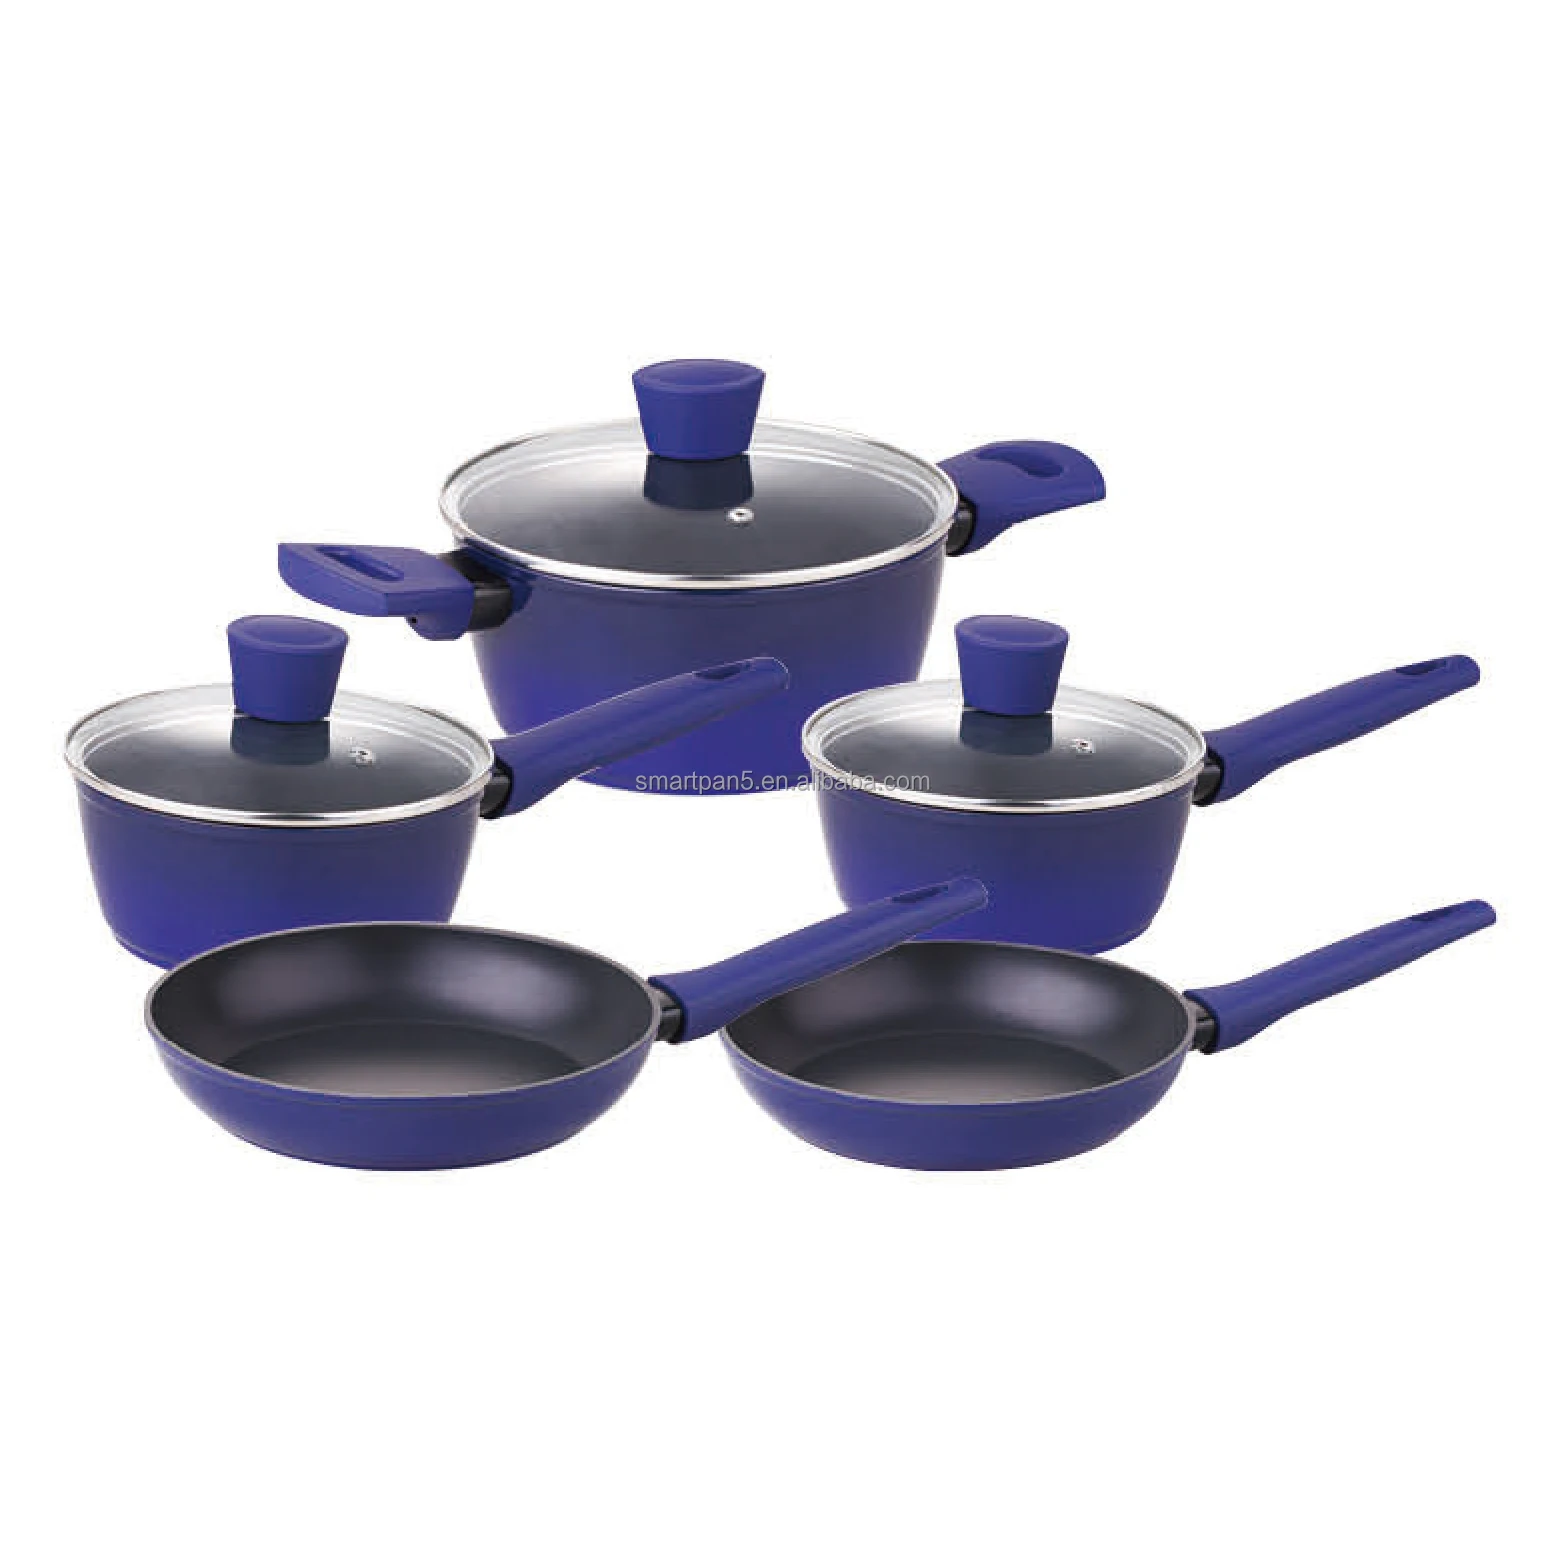 Source Purple color Cookware set 2021 hot selling with non stick